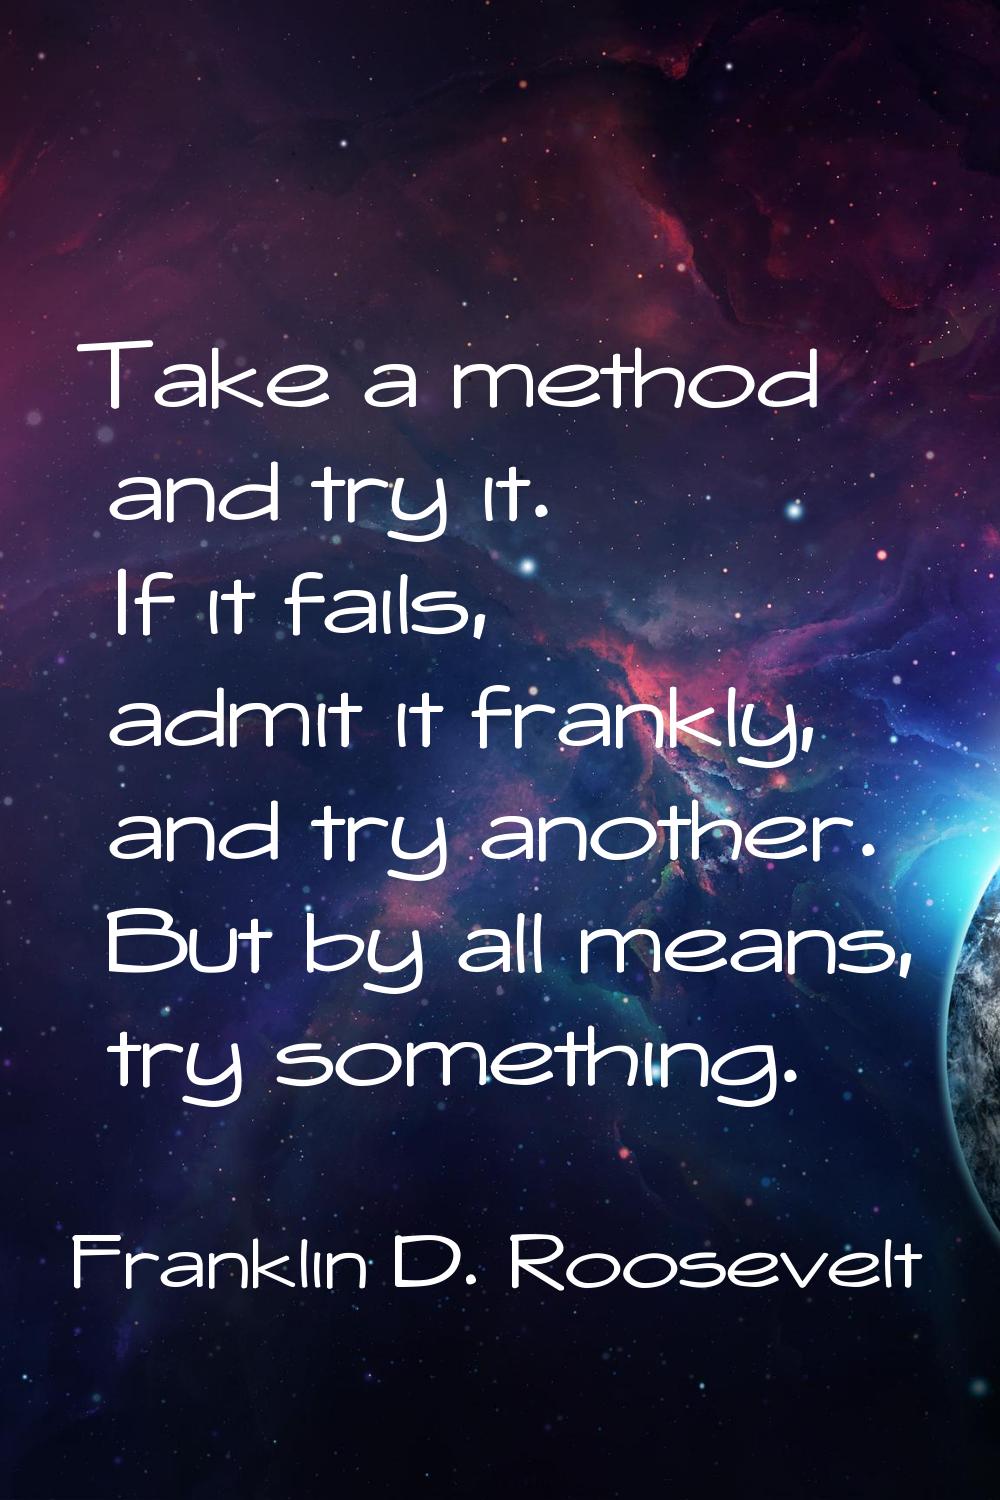 Take a method and try it. If it fails, admit it frankly, and try another. But by all means, try som